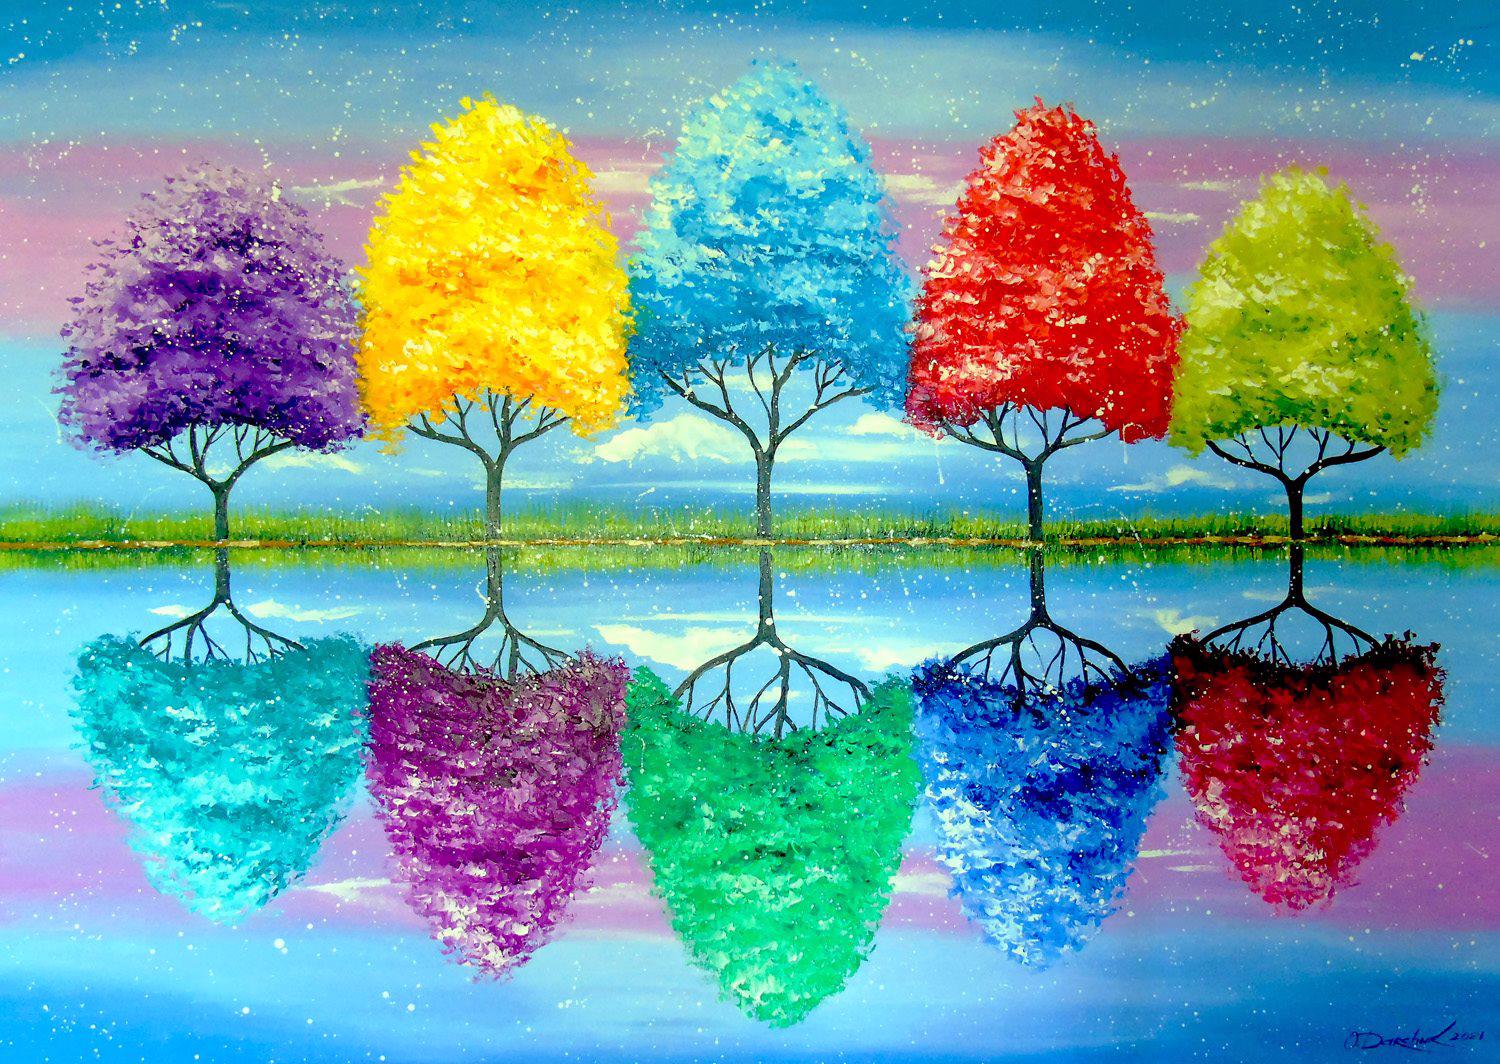 Each Tree Has Its Own Colorful History